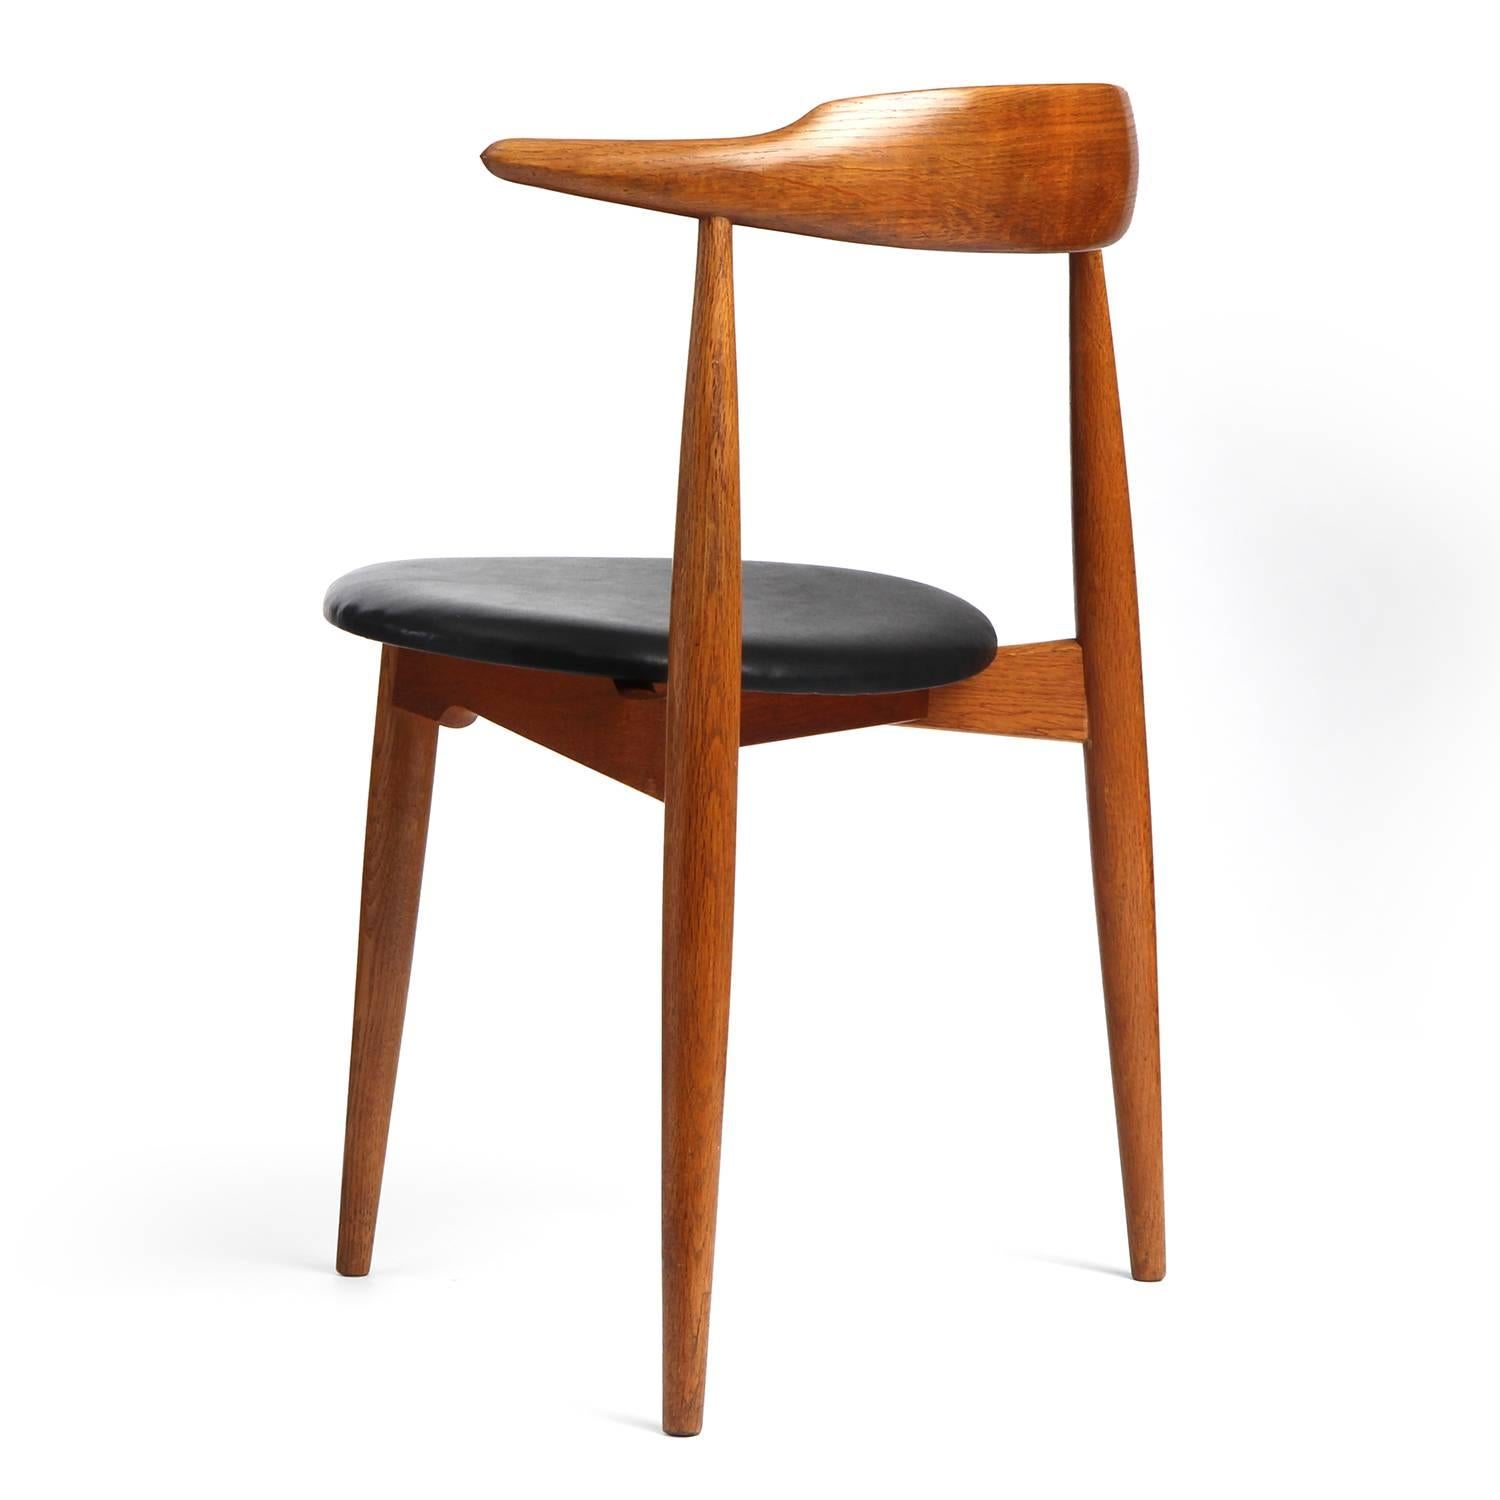 Mid-20th Century Stacking Heart Chair by Hans J. Wegner